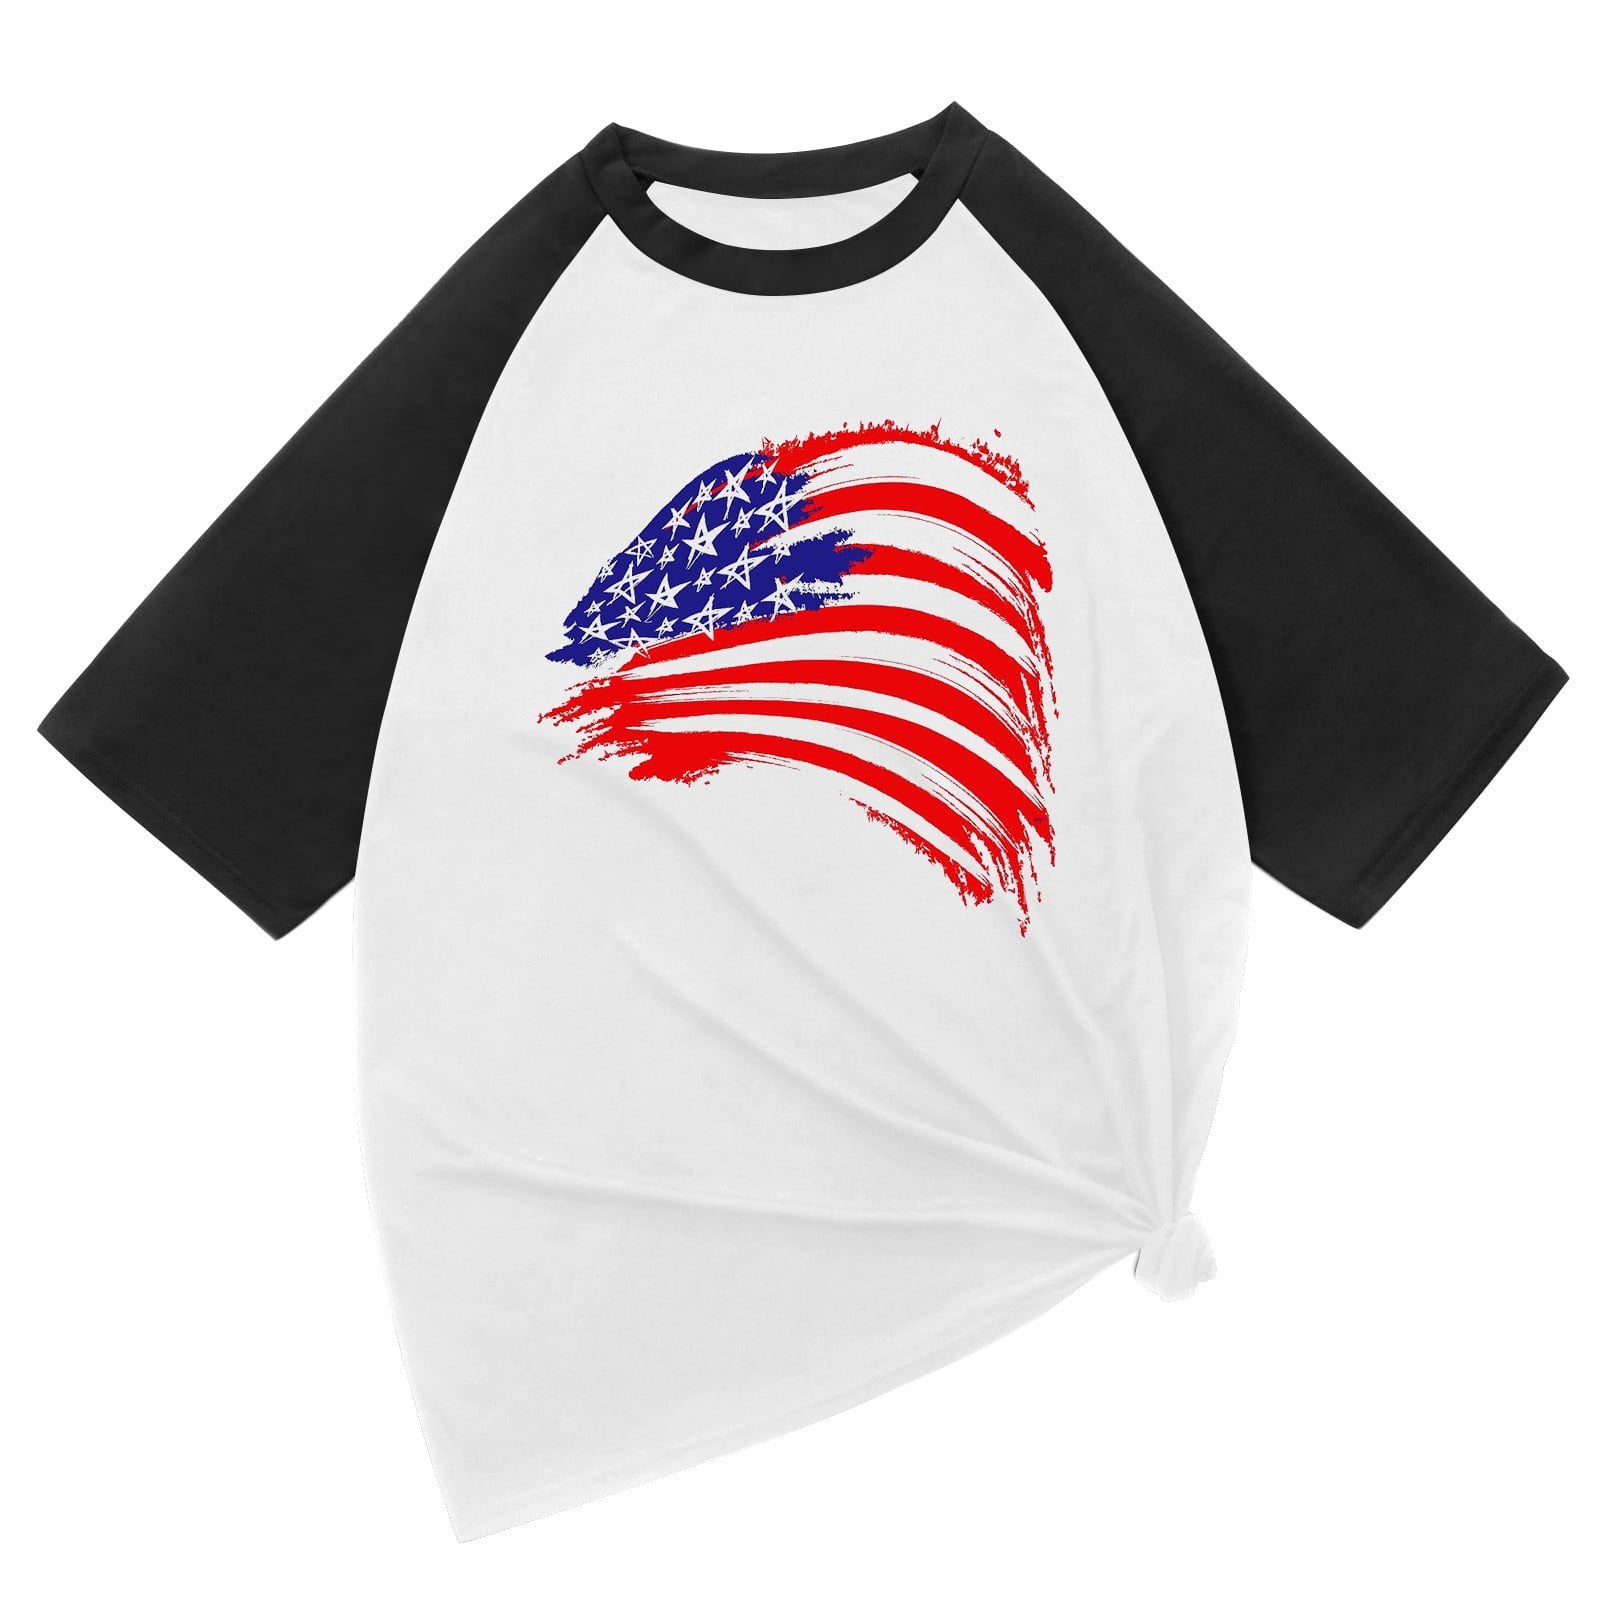 QIPOPIQ Clearance Men's Shirts 4th of July American Tees Crew Neck Pullover  T Shirt Short Sleeve Tee Shirts Red XL 